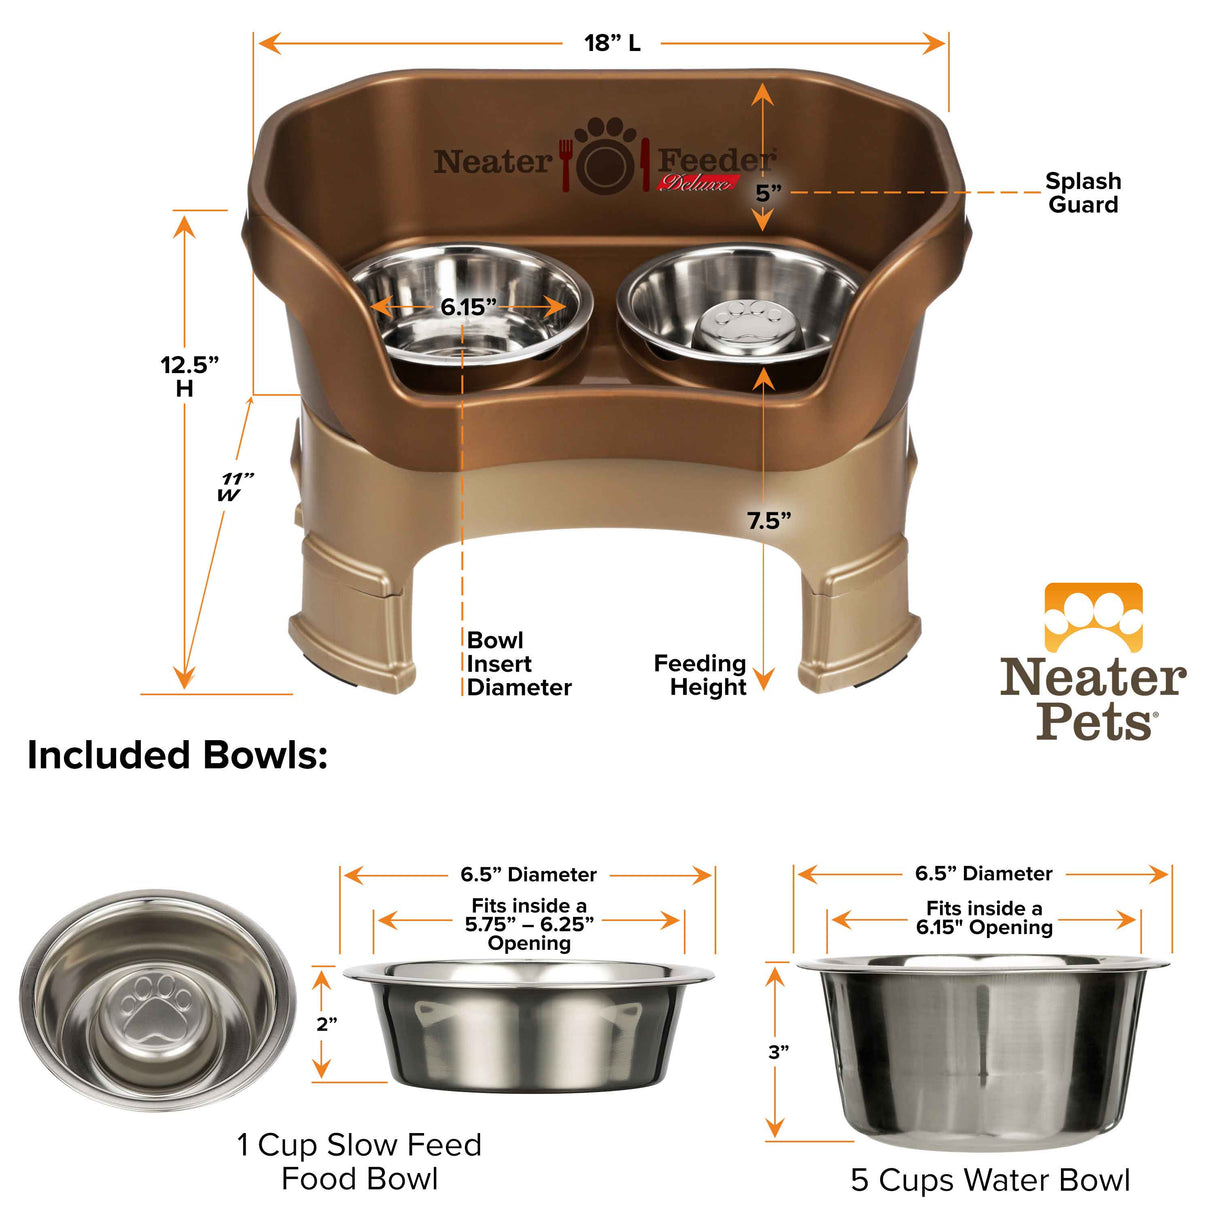 Dimensions of Bronze medium DELUXE Neater Feeder with Stainless Steel Slow Feed Bowl with leg extensions